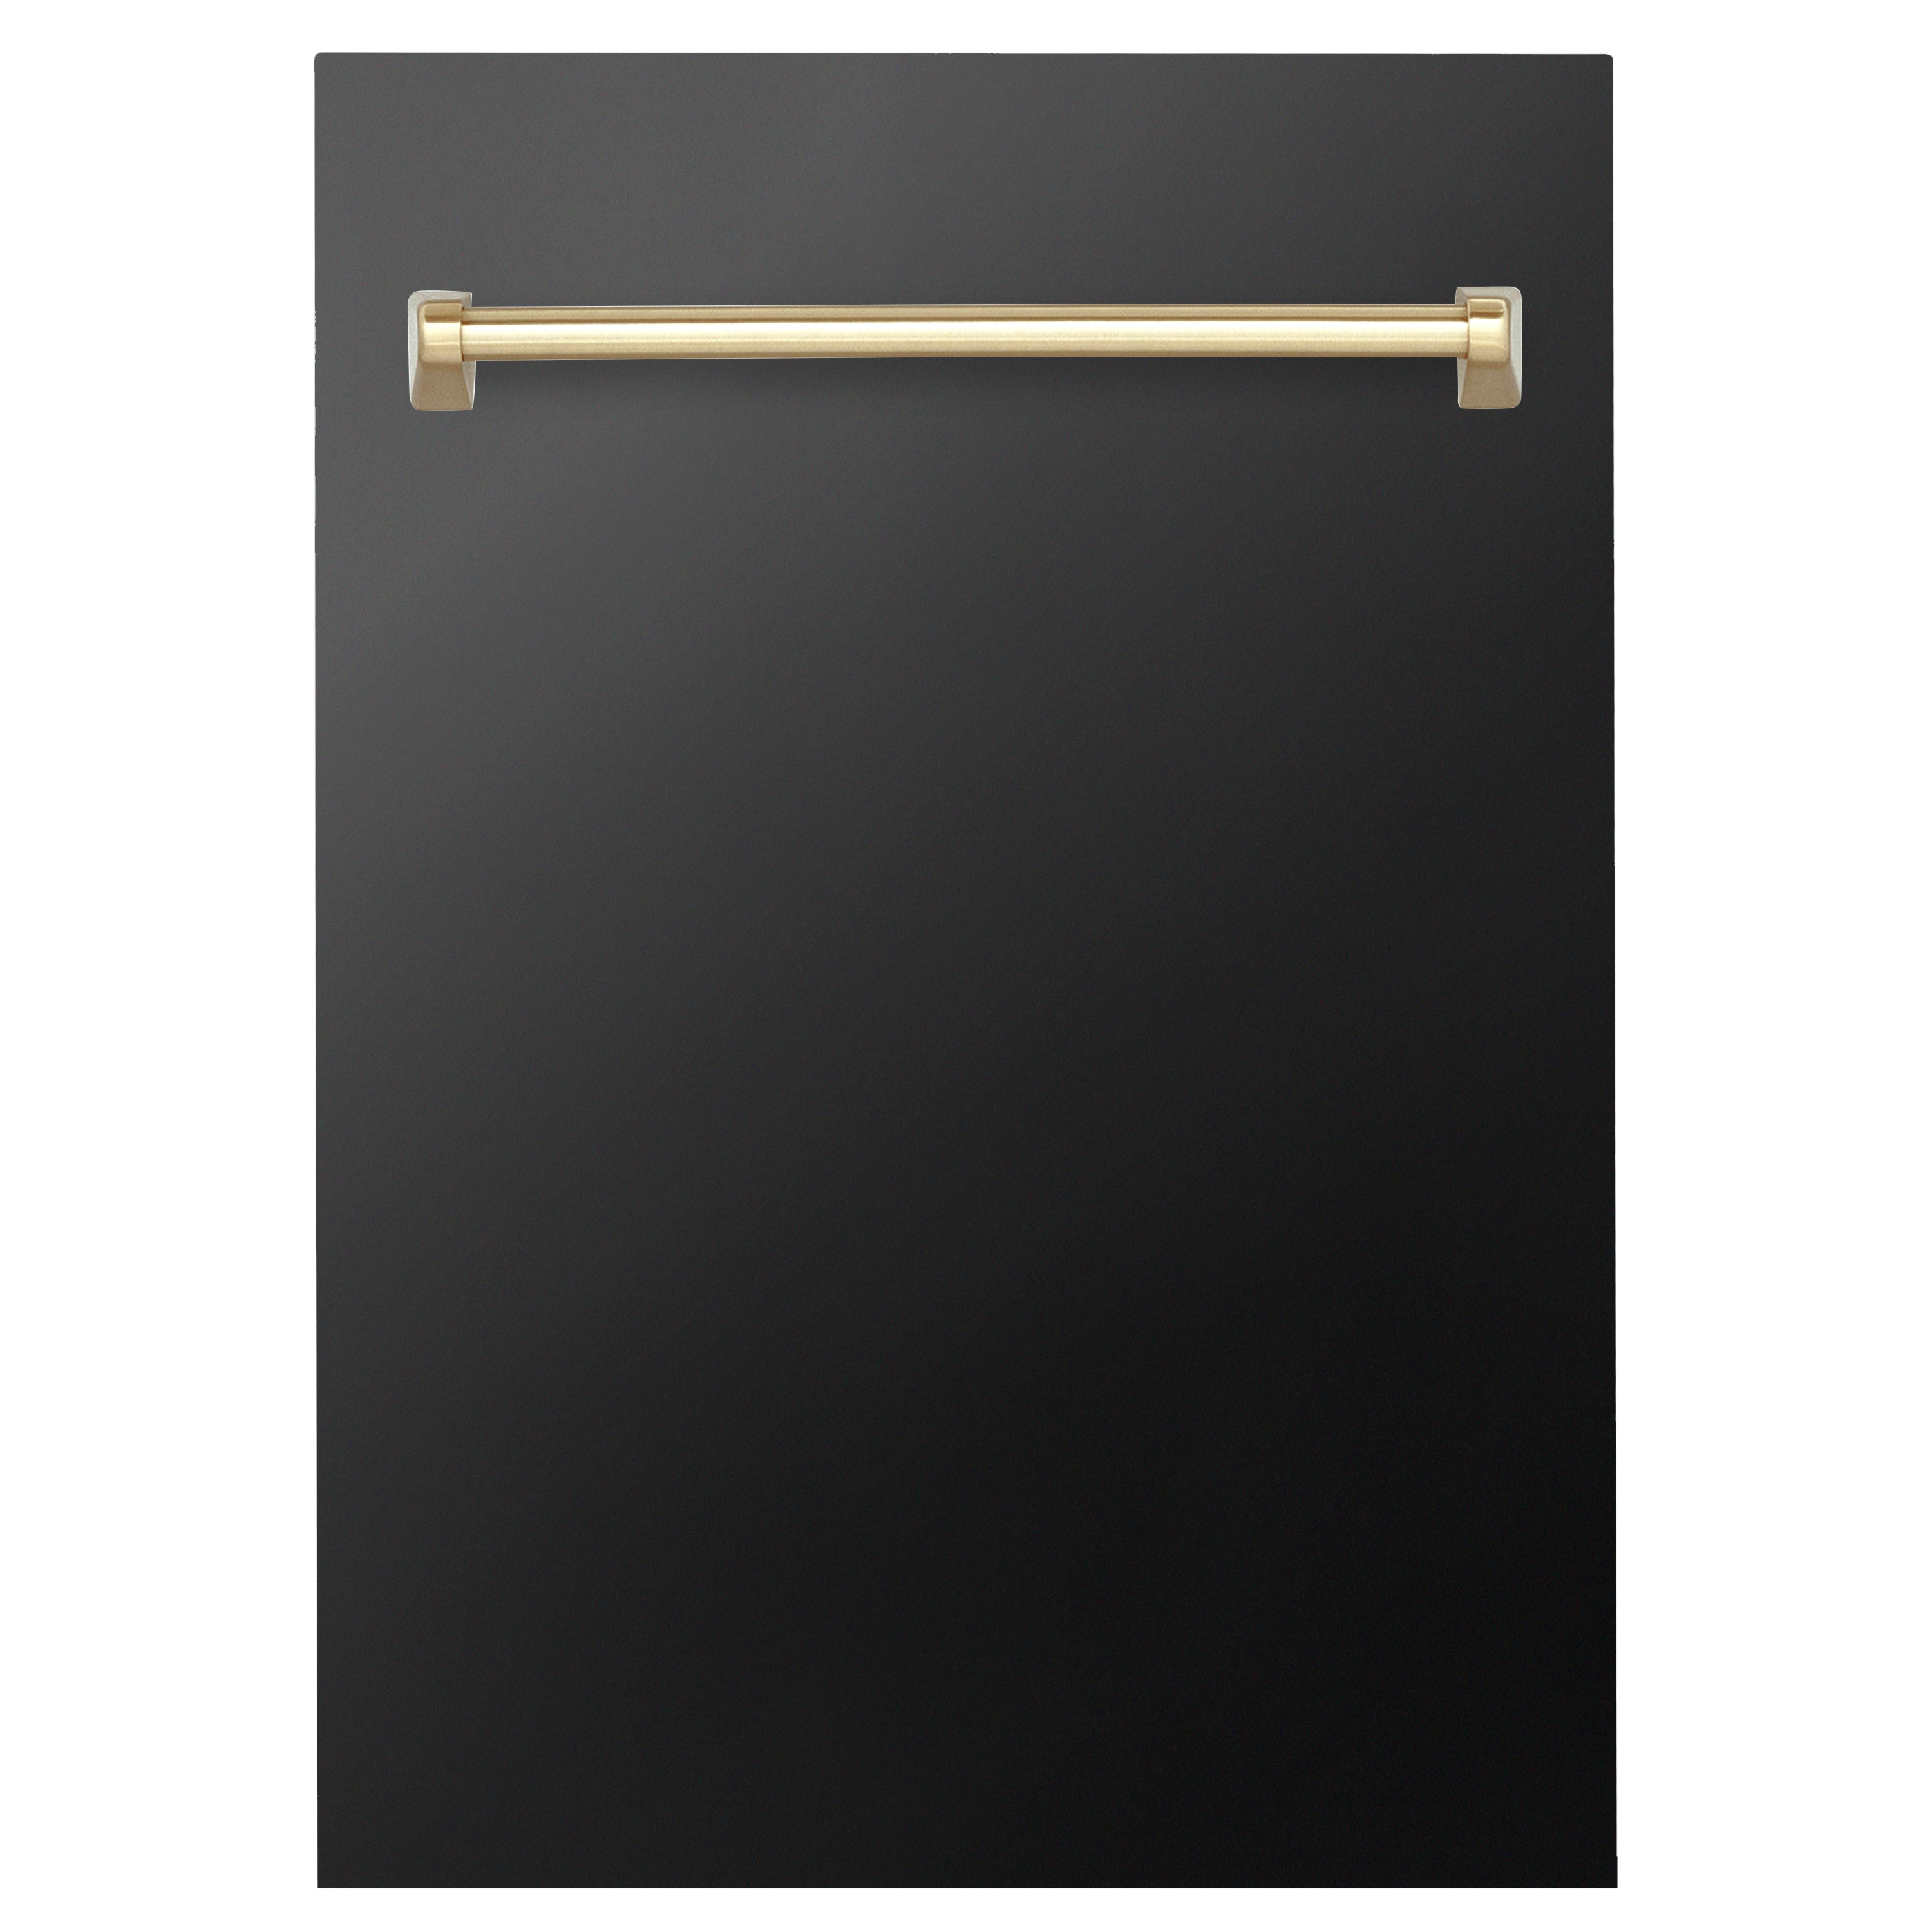 ZLINE 18" Autograph Edition Tallac Dishwasher Panel in Black Stainless Steel with Gold Handle (DPVZ-BS-18-G)